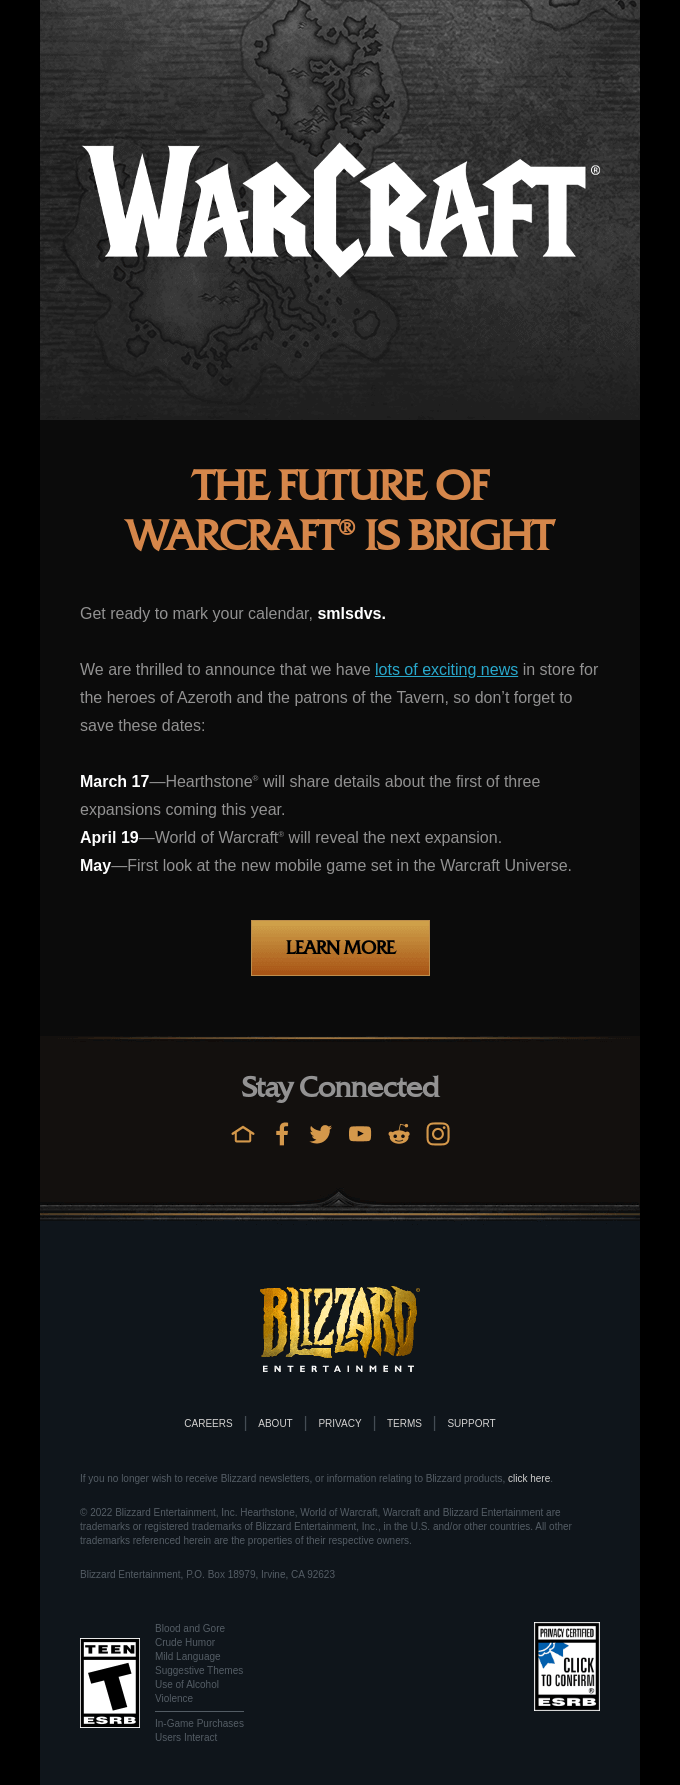 Email from Blizzard on Warcraft updates addressing the player by their in-game moniker